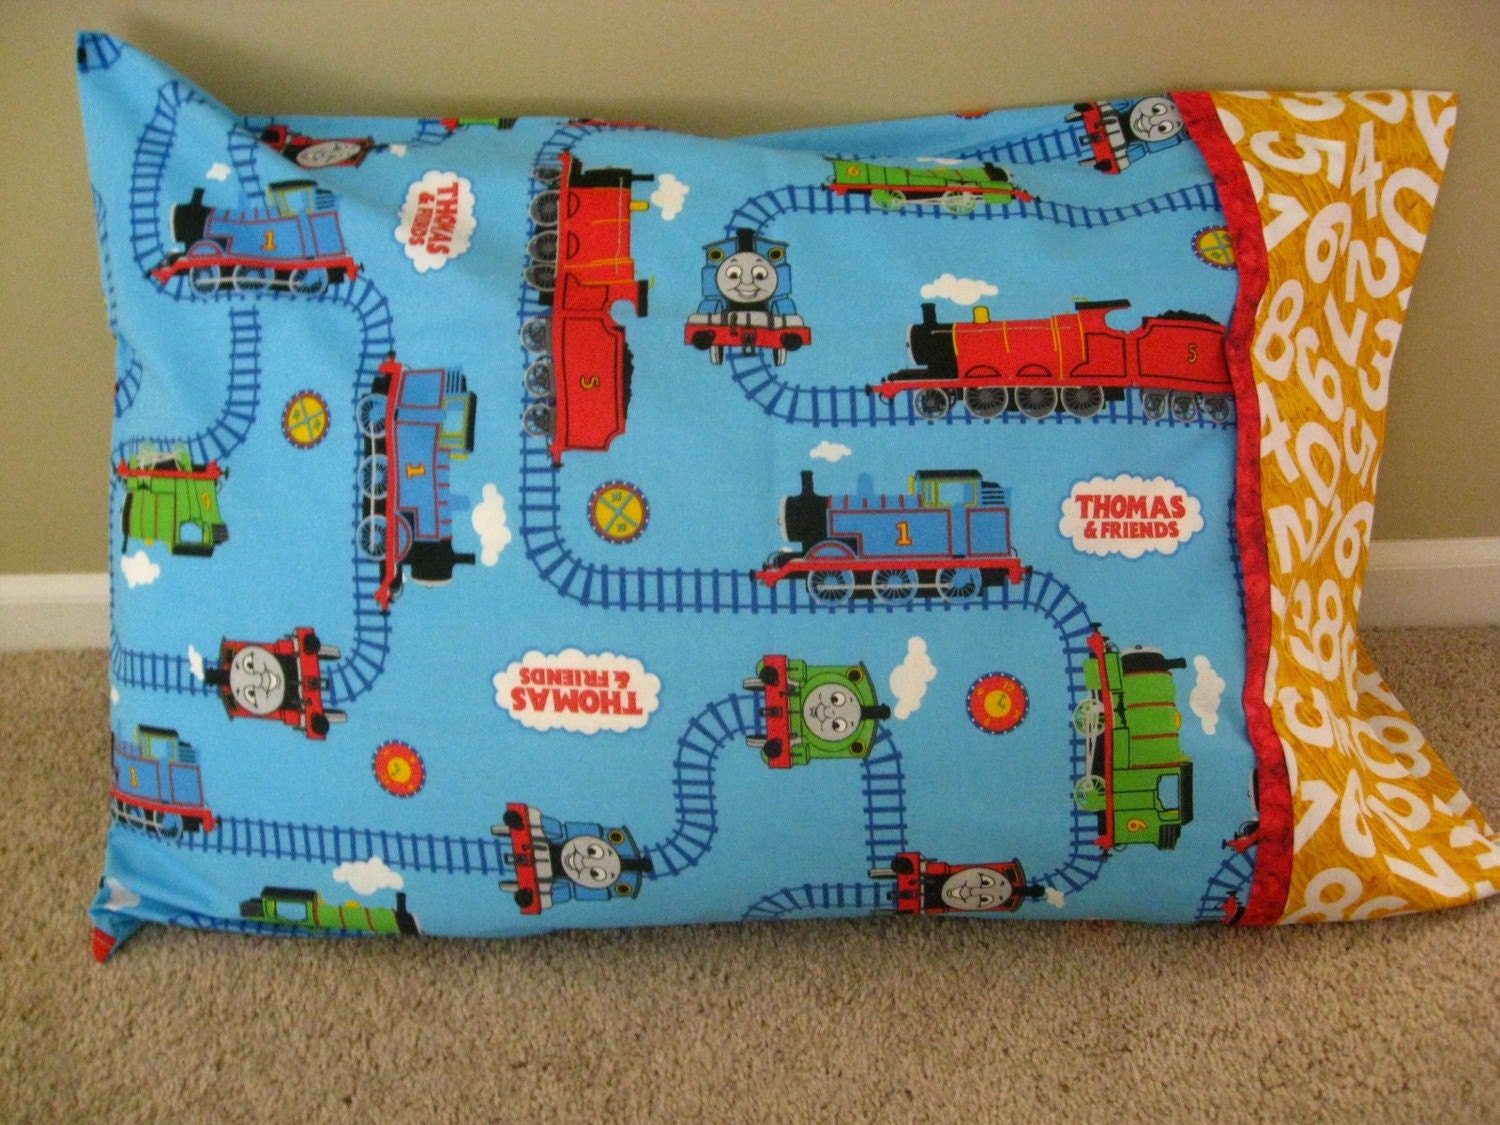 Thomas the Tank Engine and Friends Pillowcase